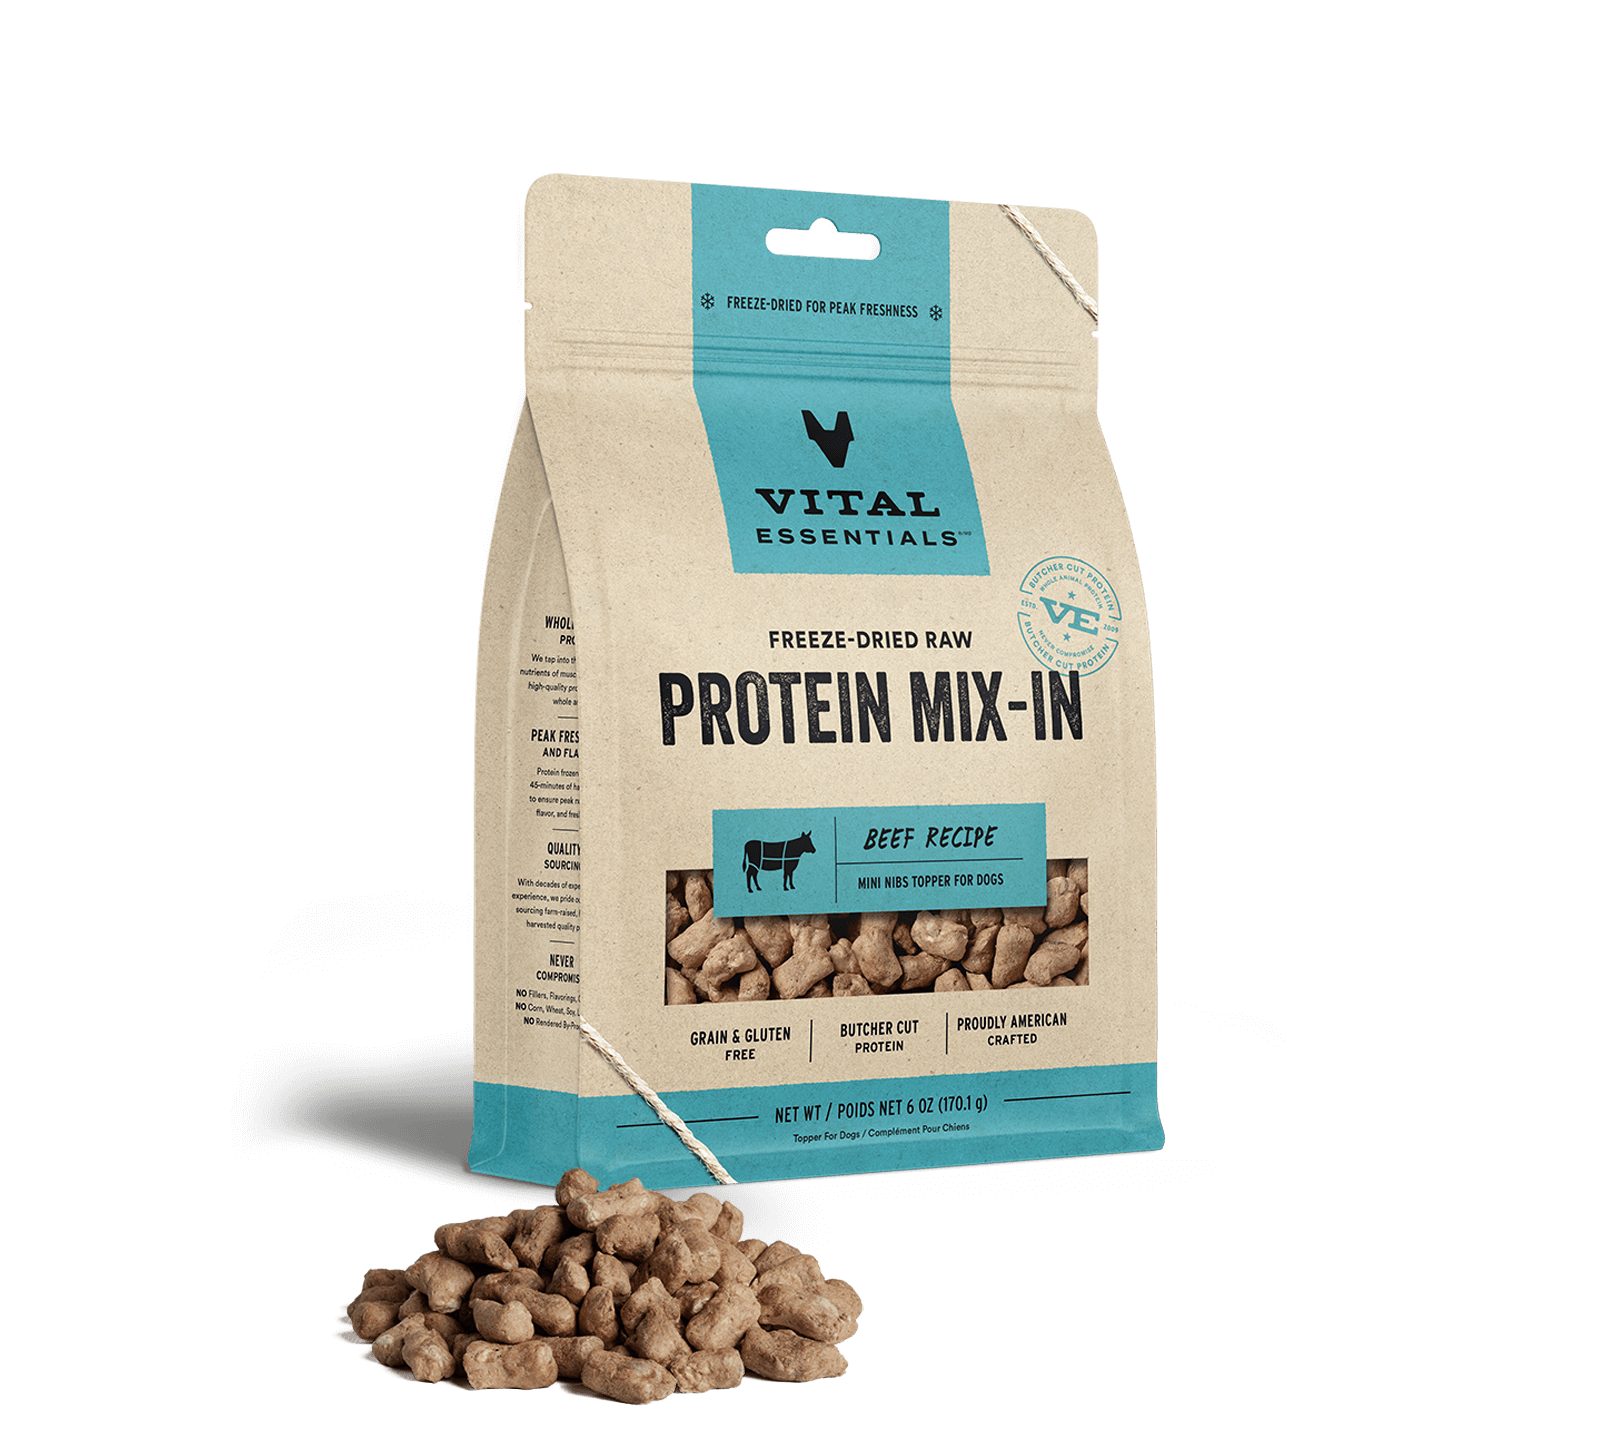 Vital Essentials Freeze-Dried Raw Protein Mix-In Beef Recipe Mini Nibs Topper for Dogs, 6 oz - Health/First Aid